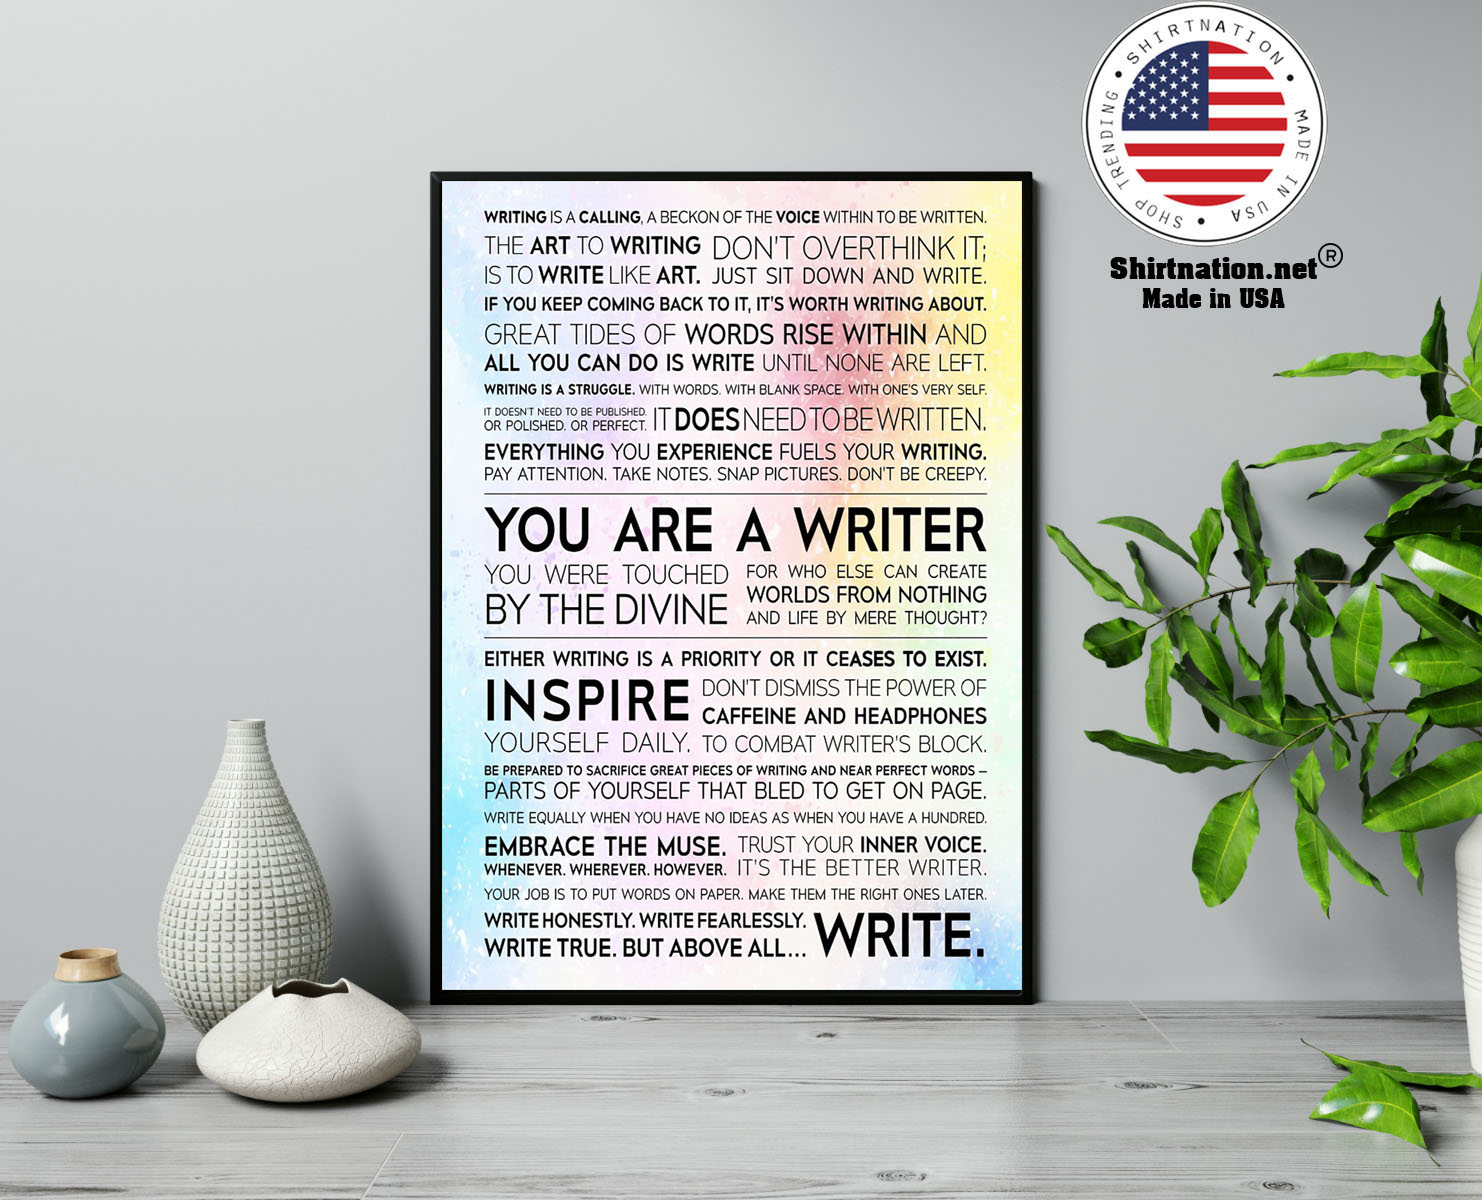 Writer Manifesto writing is a calling a beckon of the voice poster 13